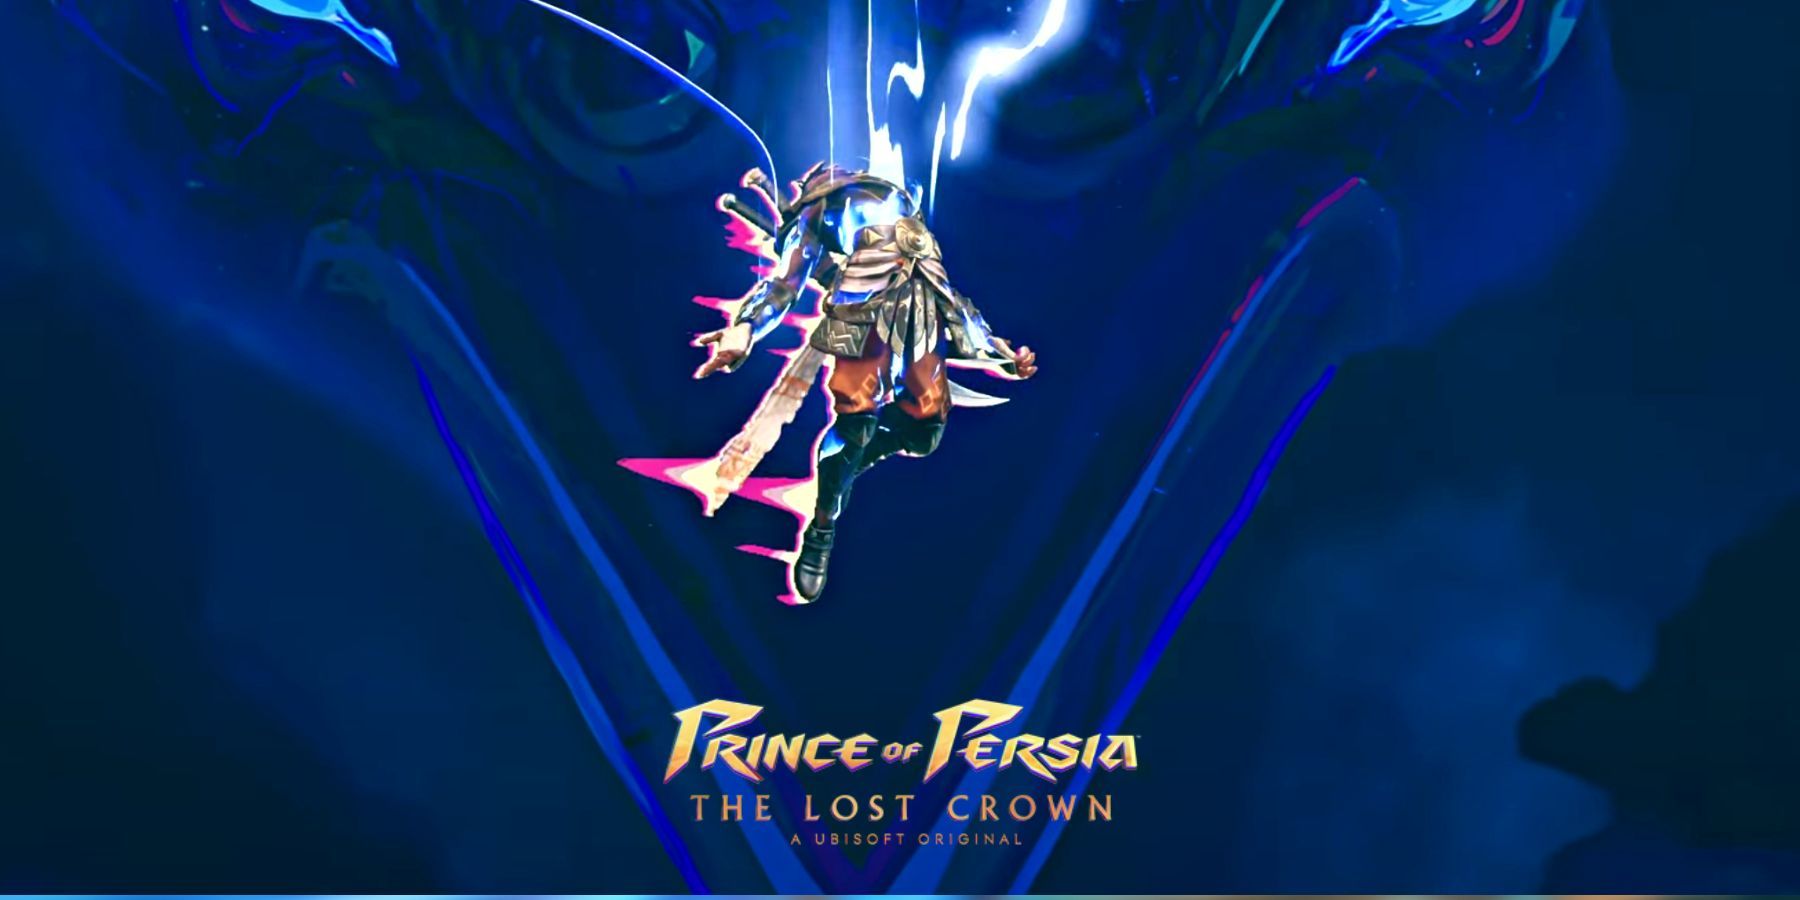 Prince of Persia the Lost Crown Achievement Guide, Know The Main